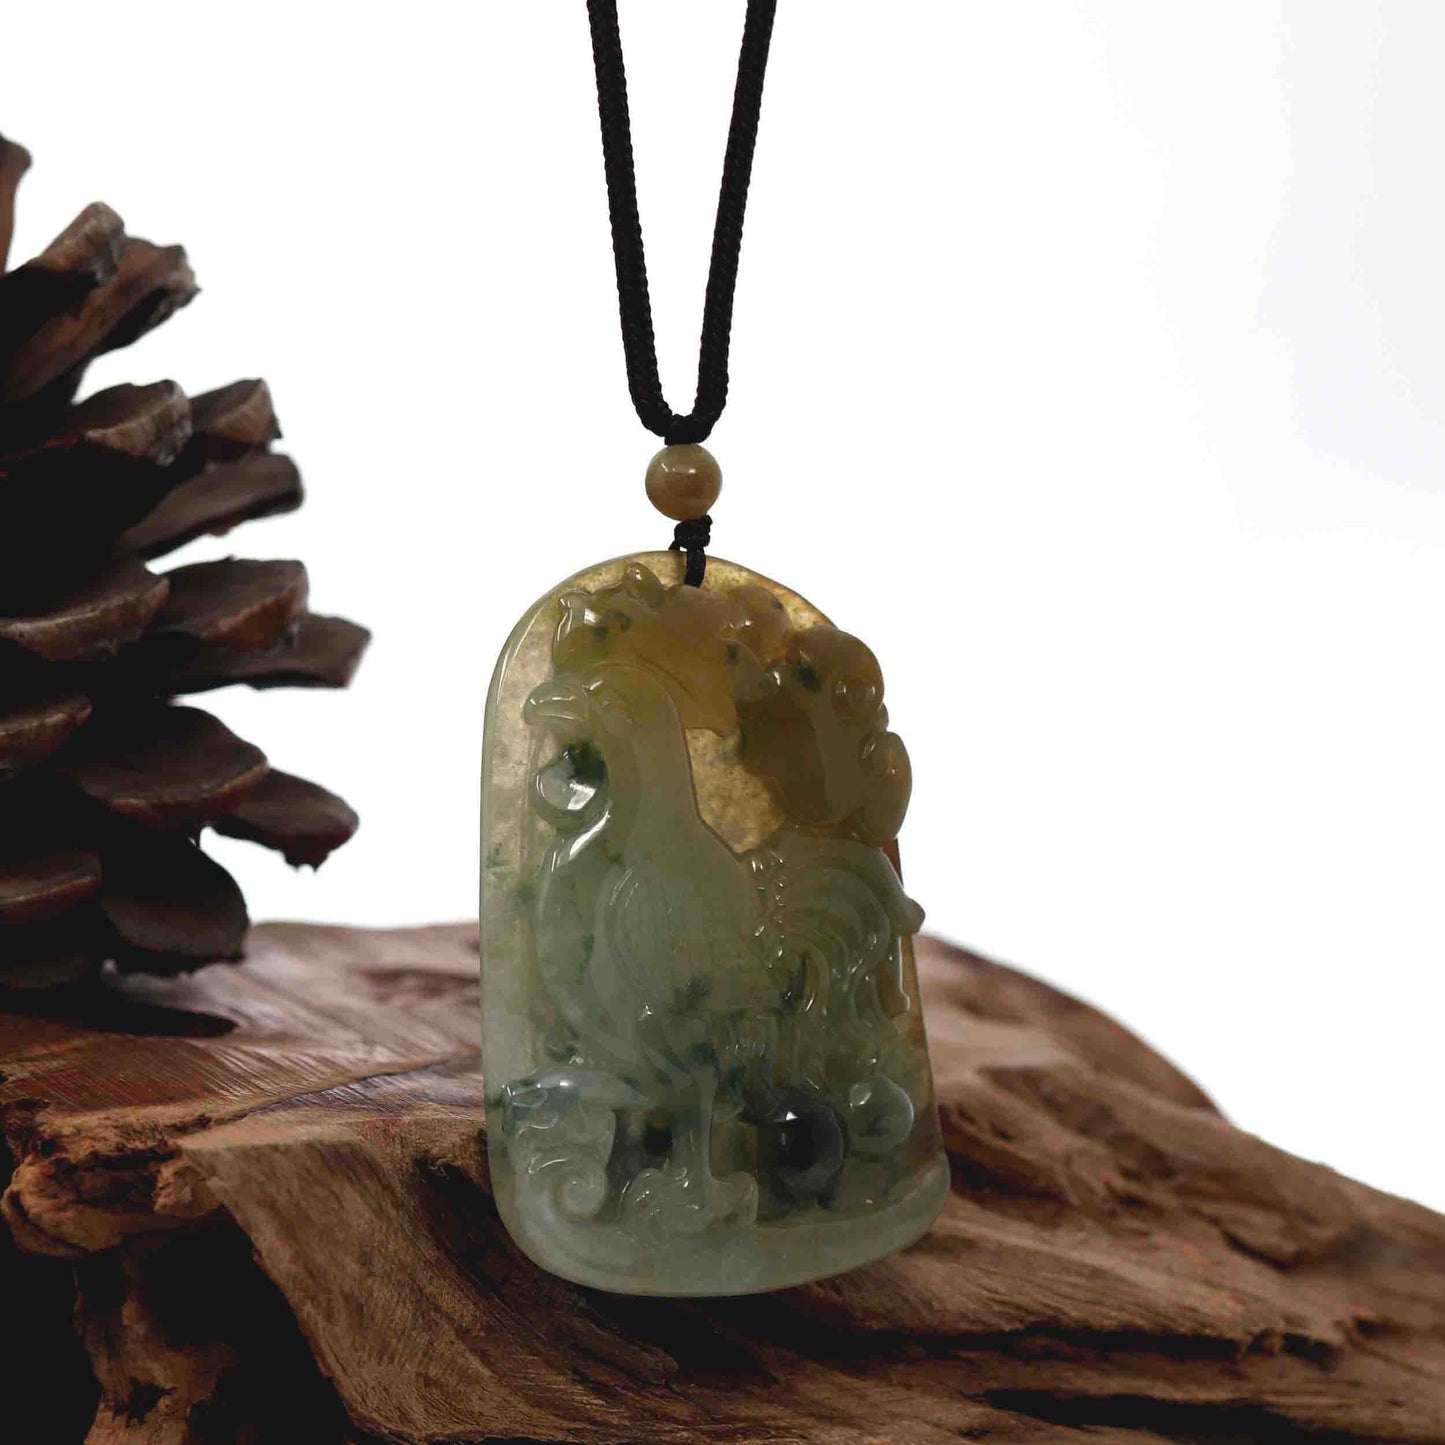 RealJade® Co. Natural Honey Yellow Jadeite Jade "Rooster" Pendant Necklace For Men, Collectibles.